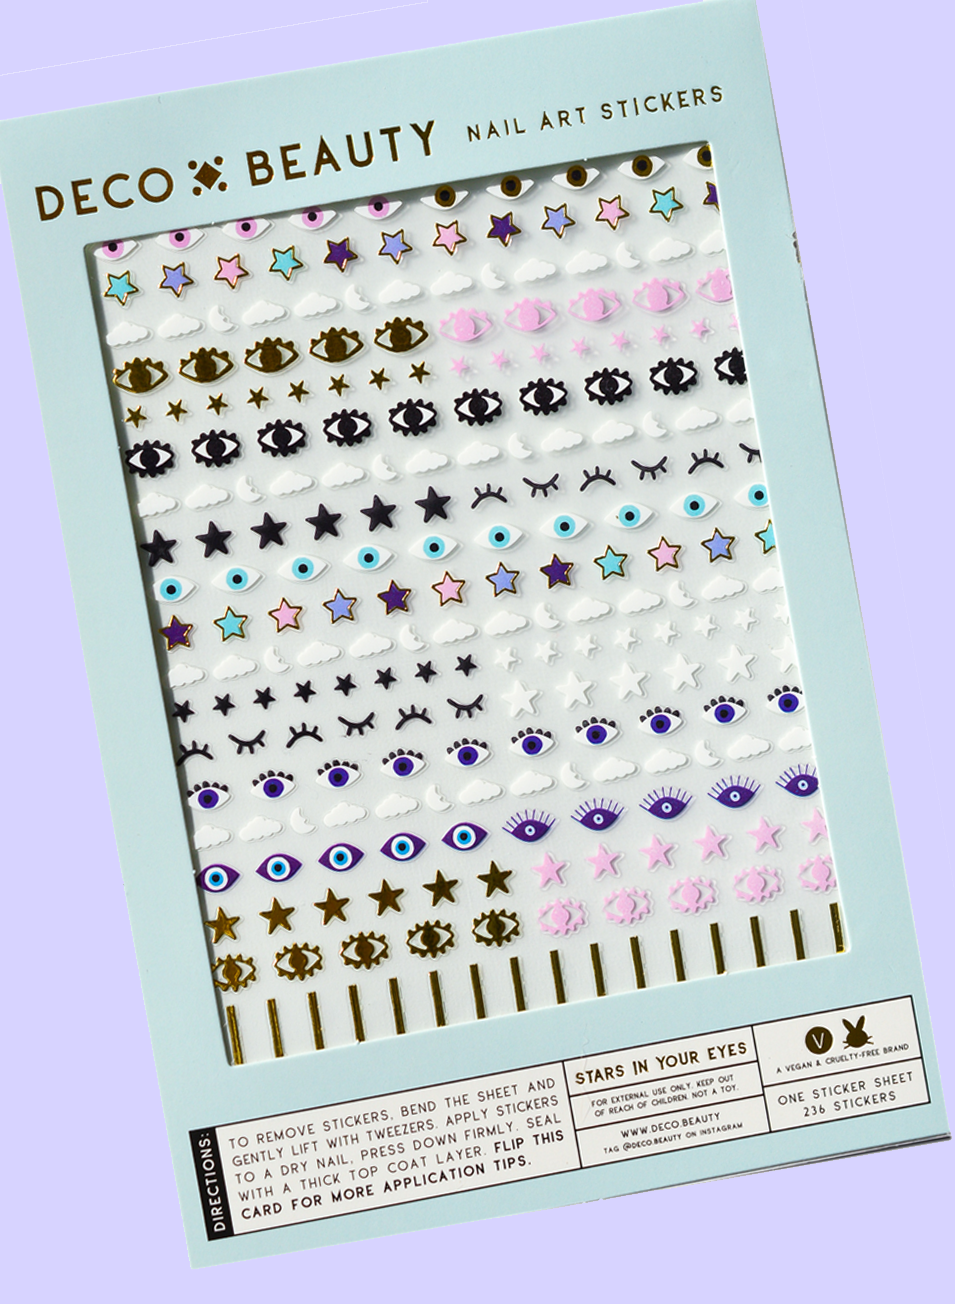 STARS IN YOUR EYES – Deco Beauty